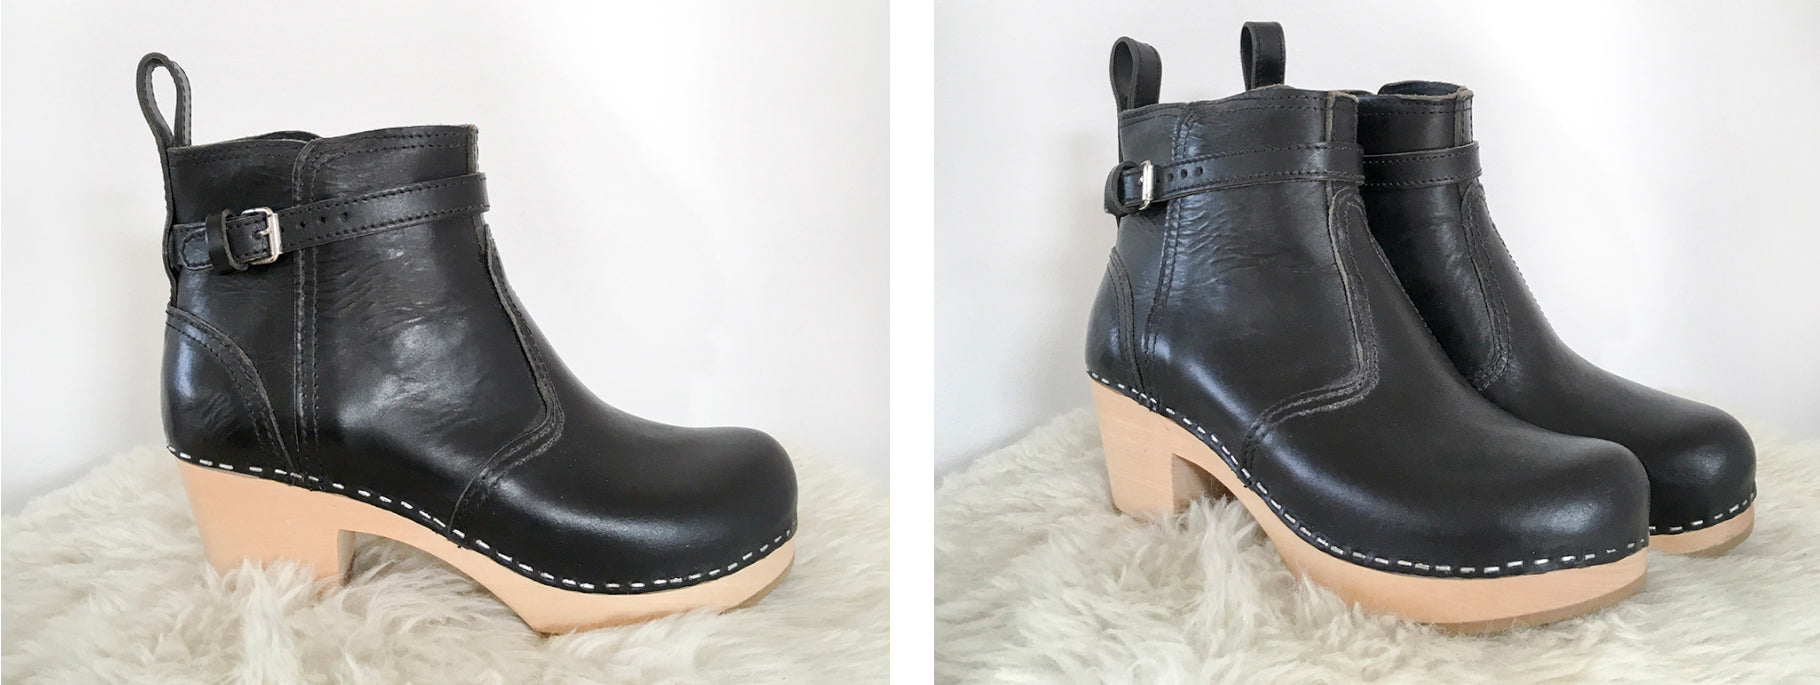 All about clogs: a primer and review of brands | Grainline Studio